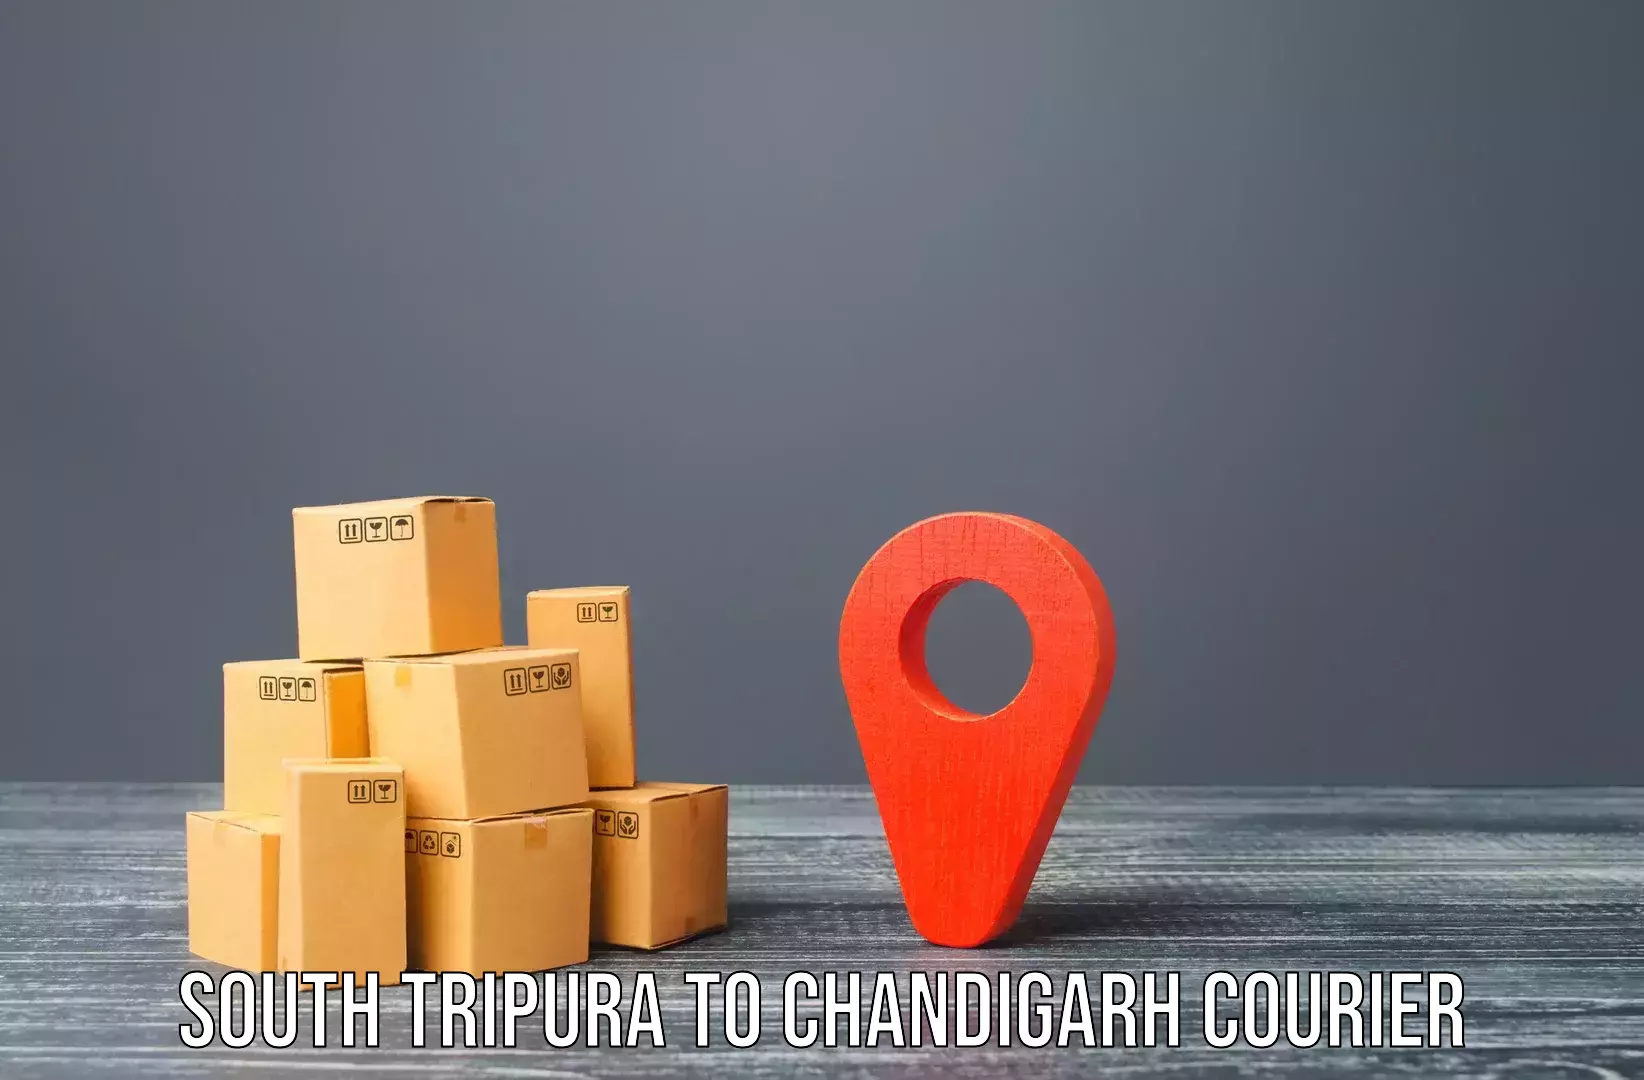 Home goods moving company South Tripura to Chandigarh